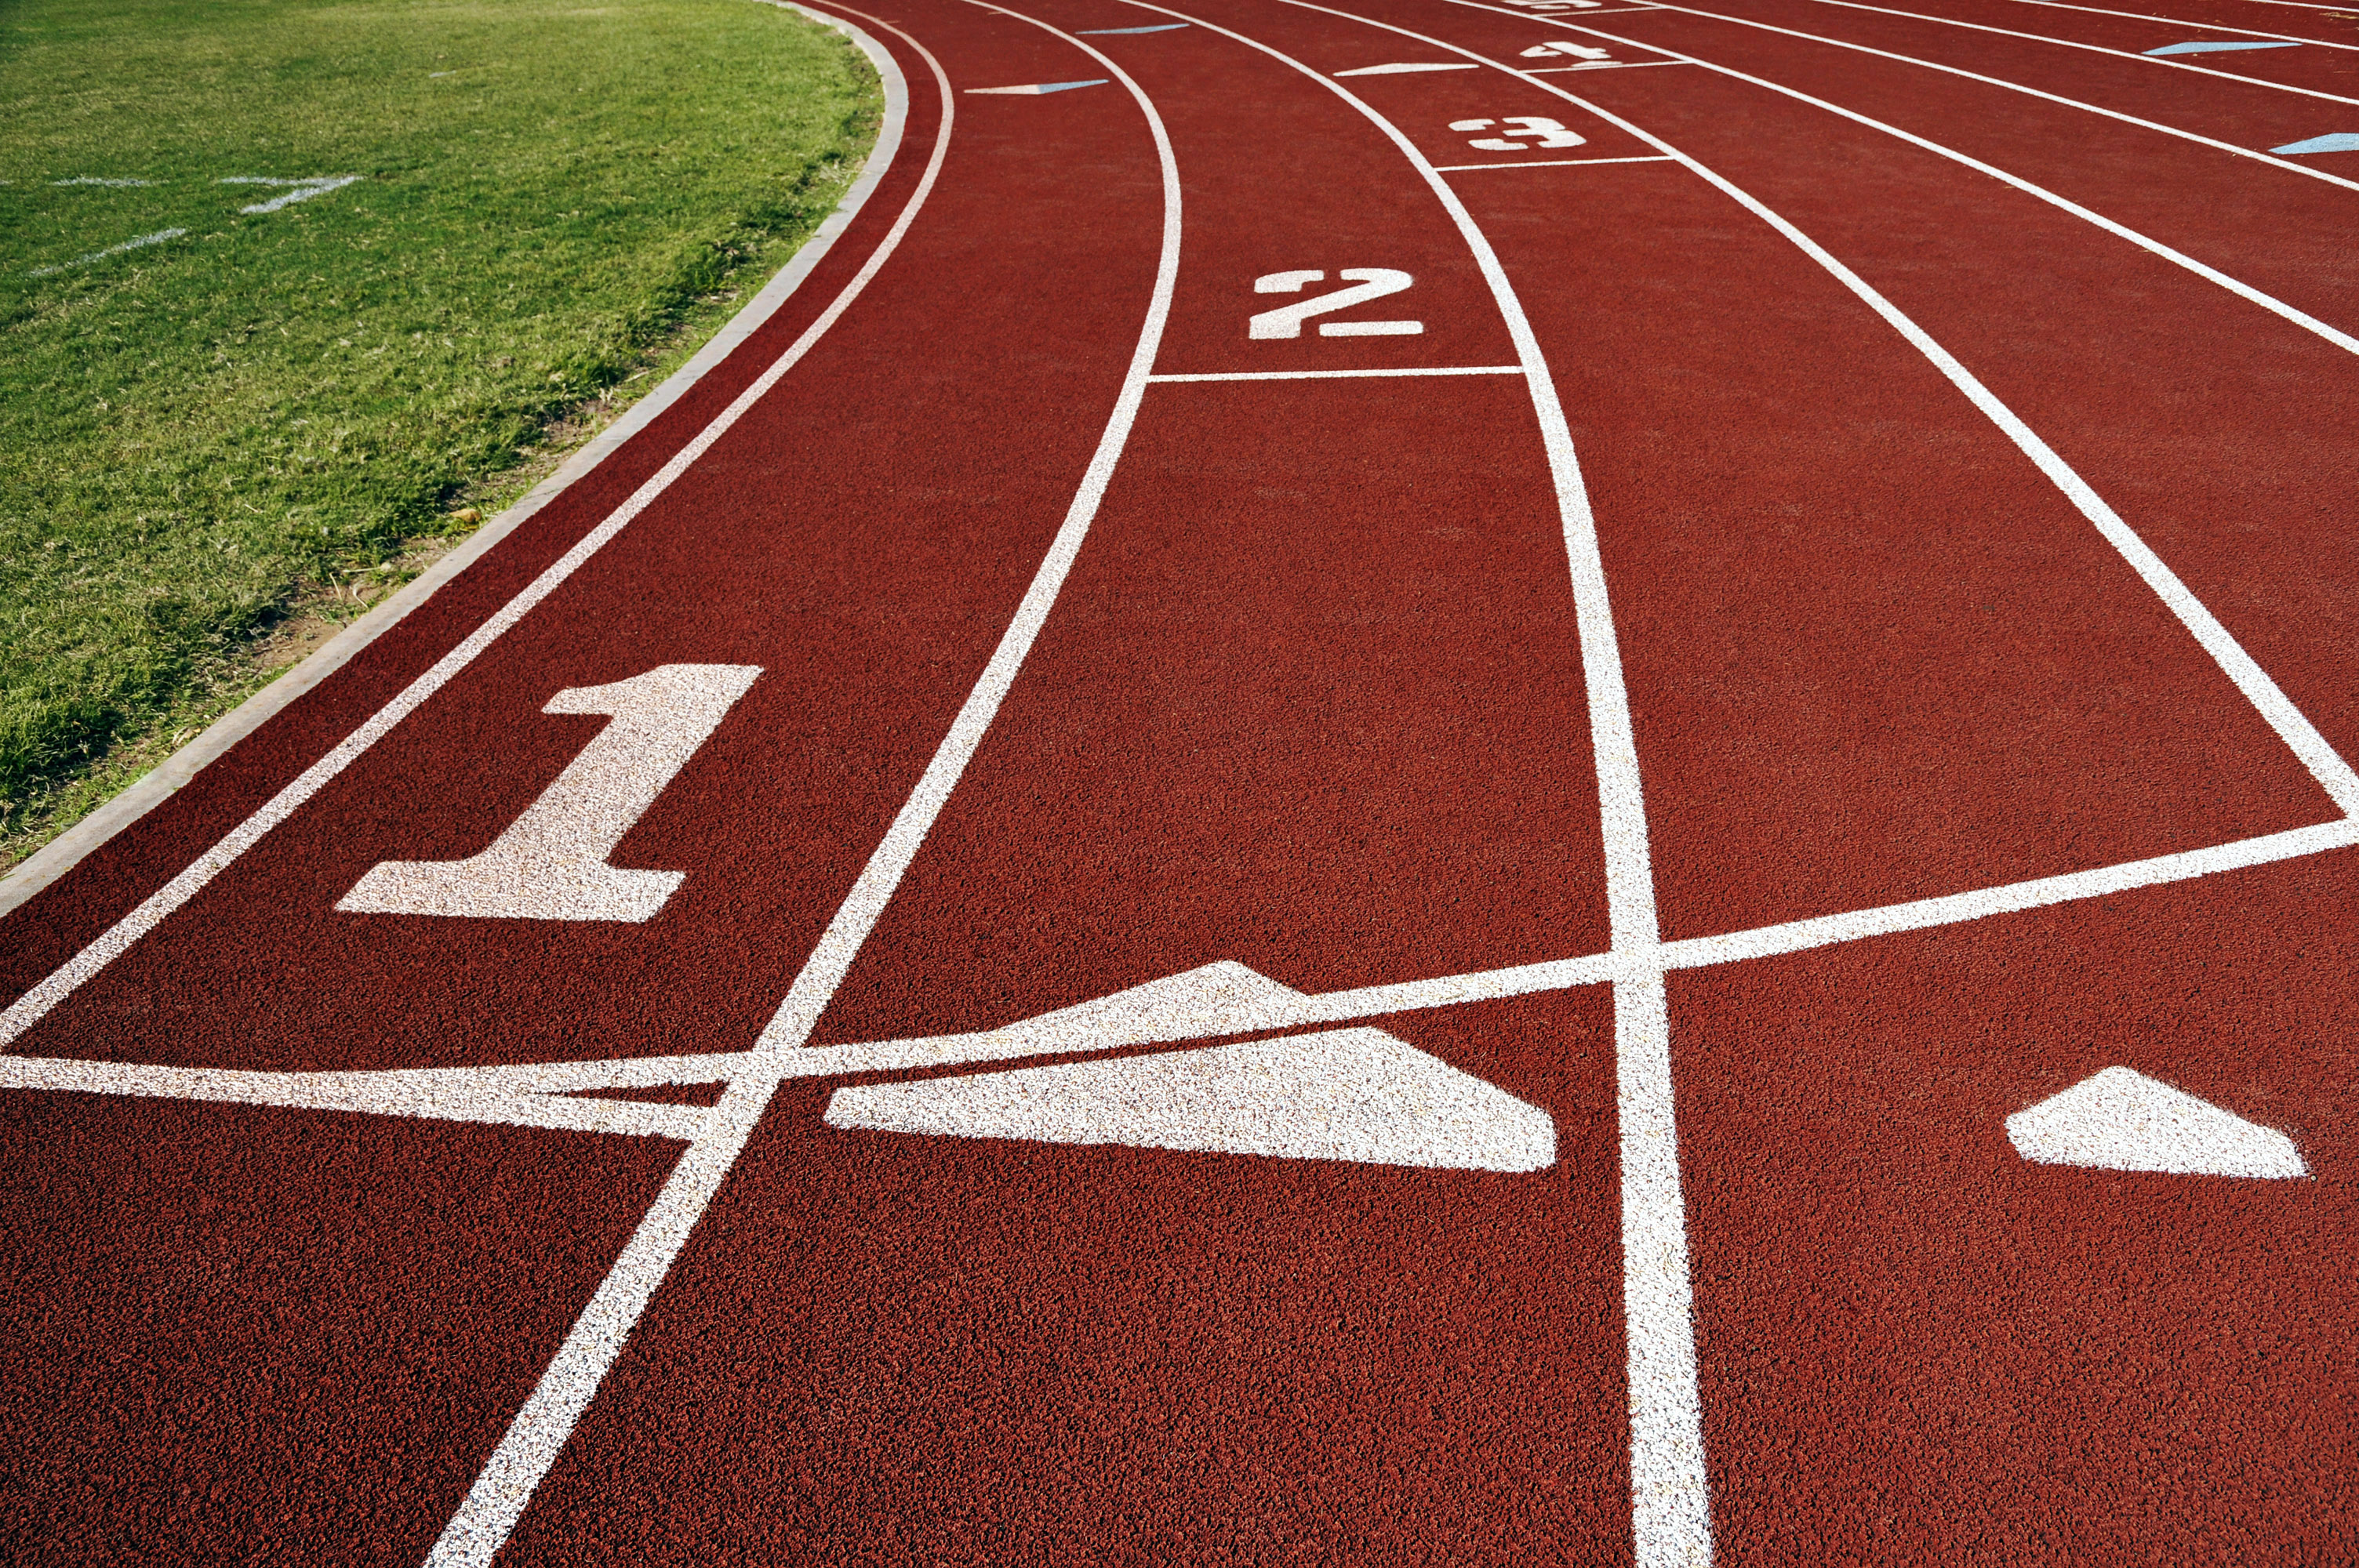 Interval Training on Track